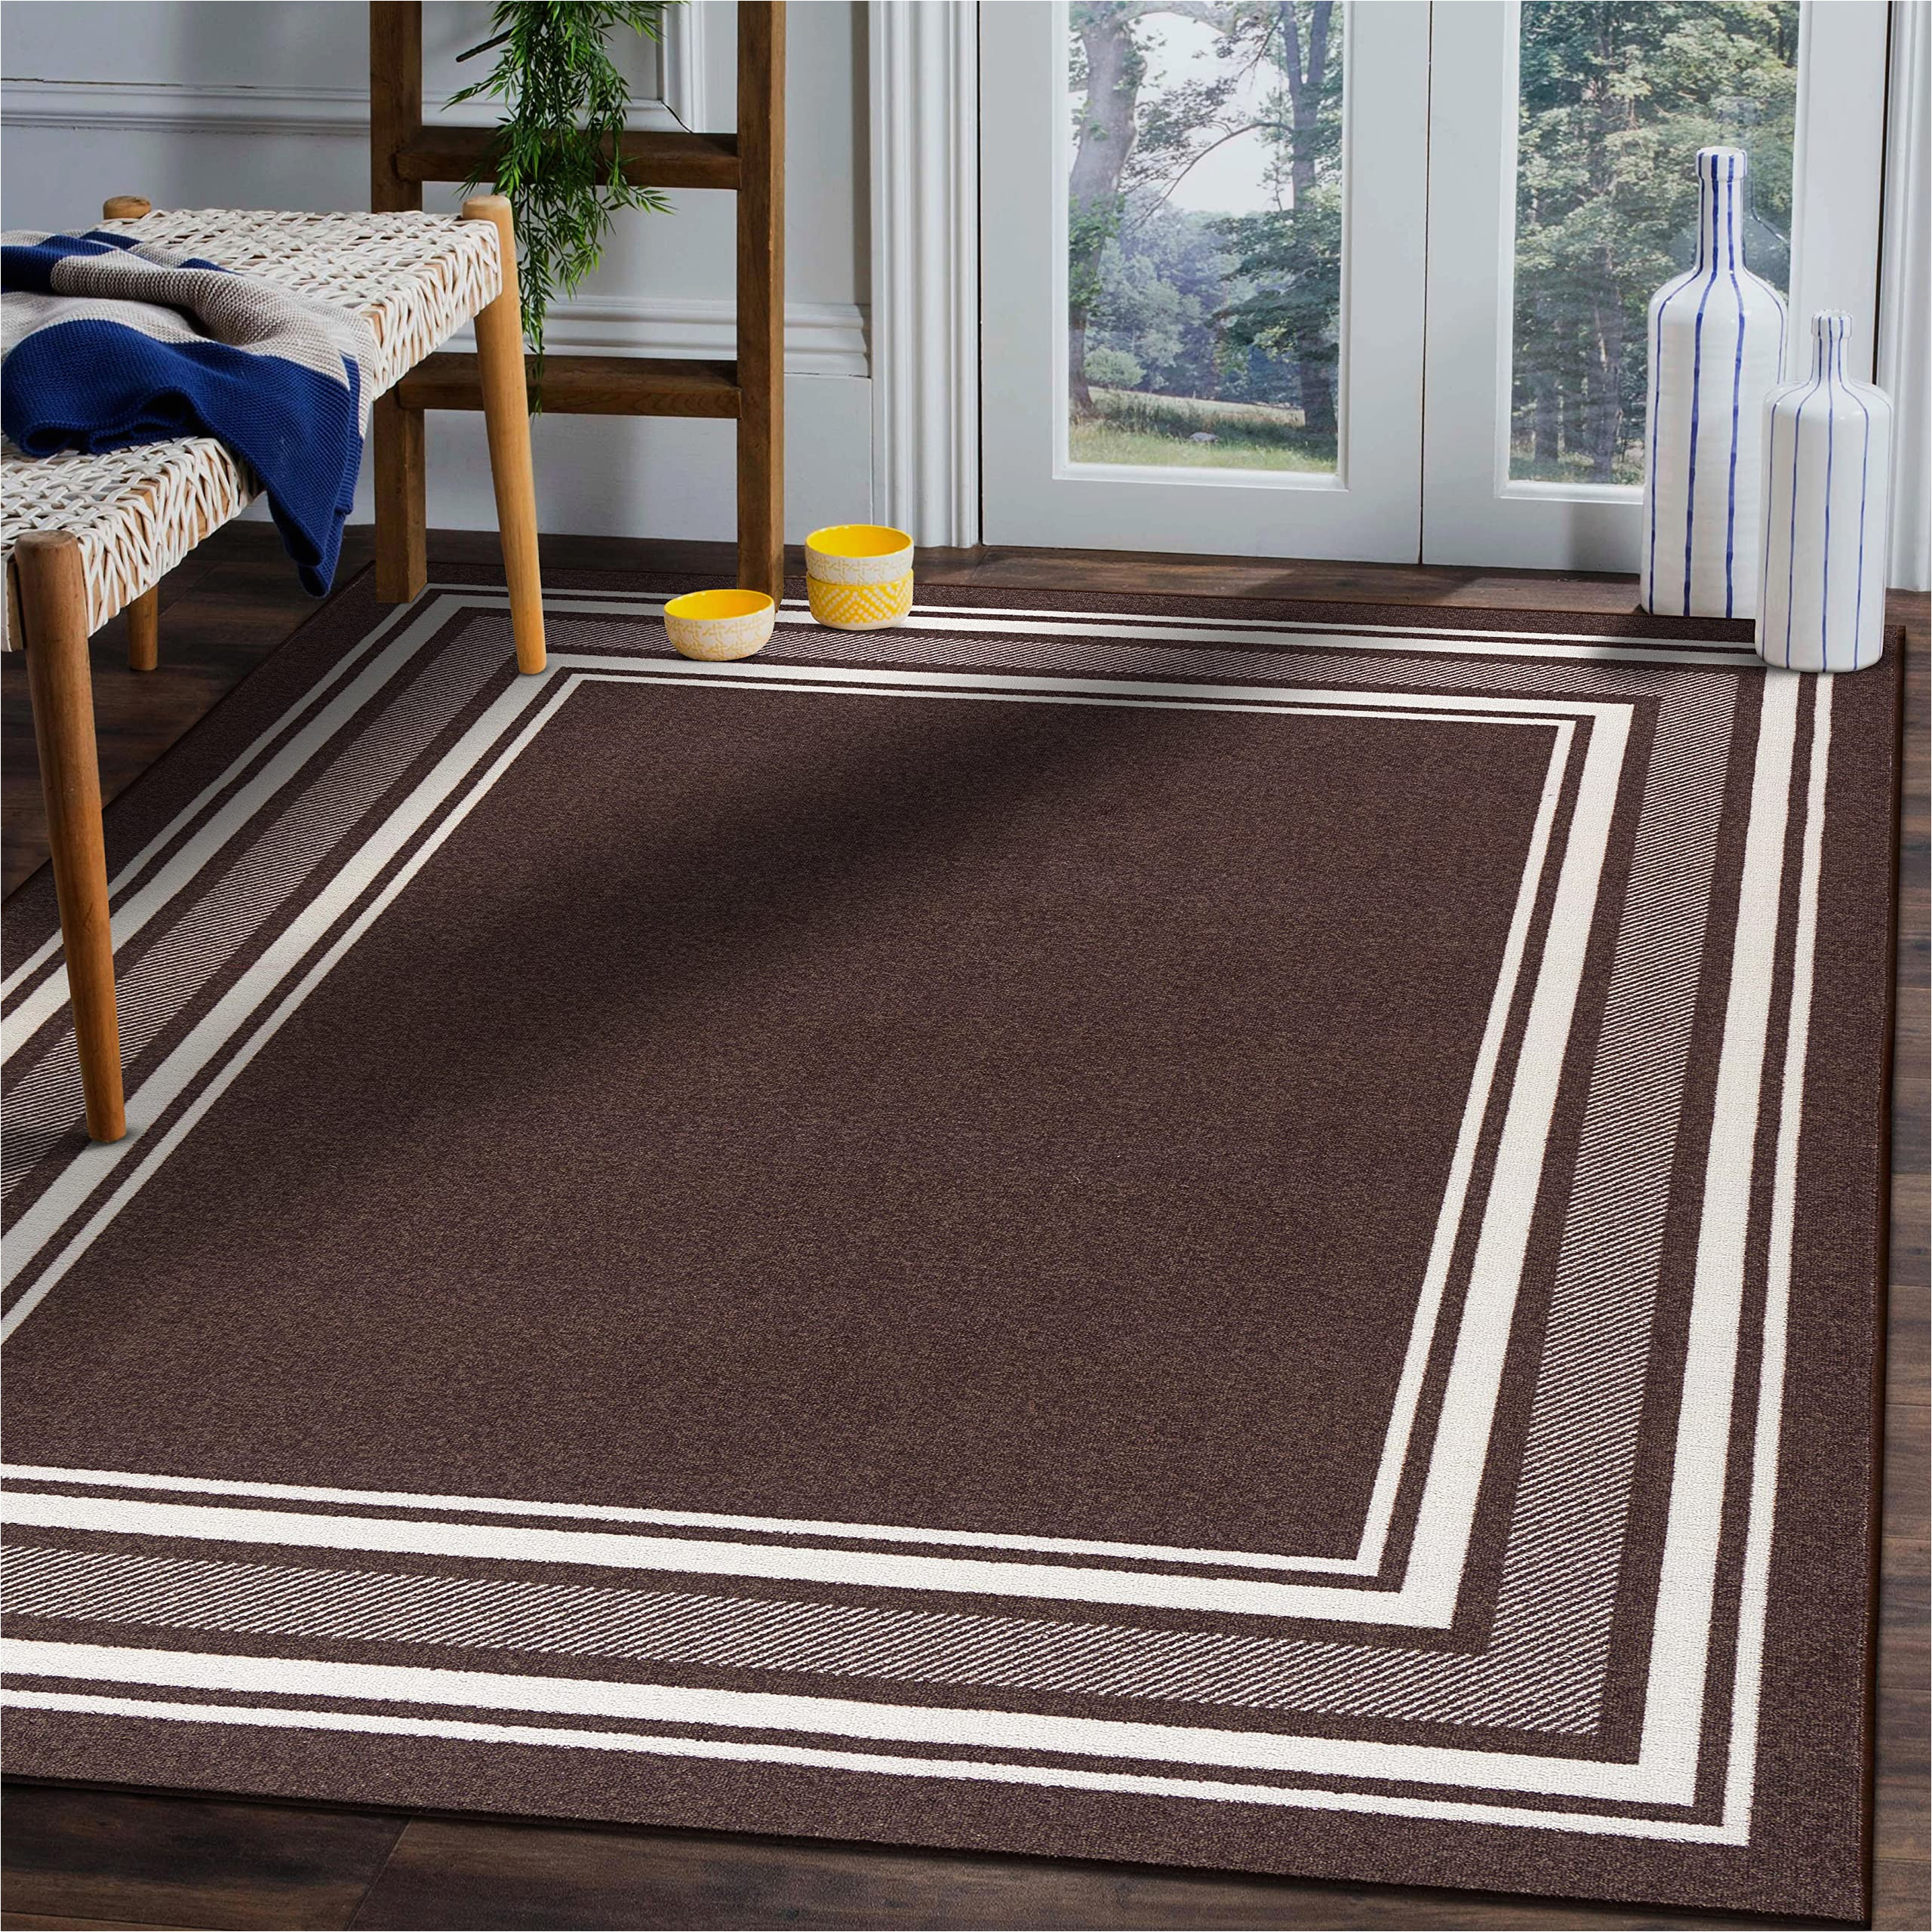 3×5 area Rugs On Sale Beverly Rug Modern Bordered 3×5 area Rug for Living Room, Dining Room Rug, Bedroom Carpet, Indoor Non Skid Rubber Backed area Rugs, Brown